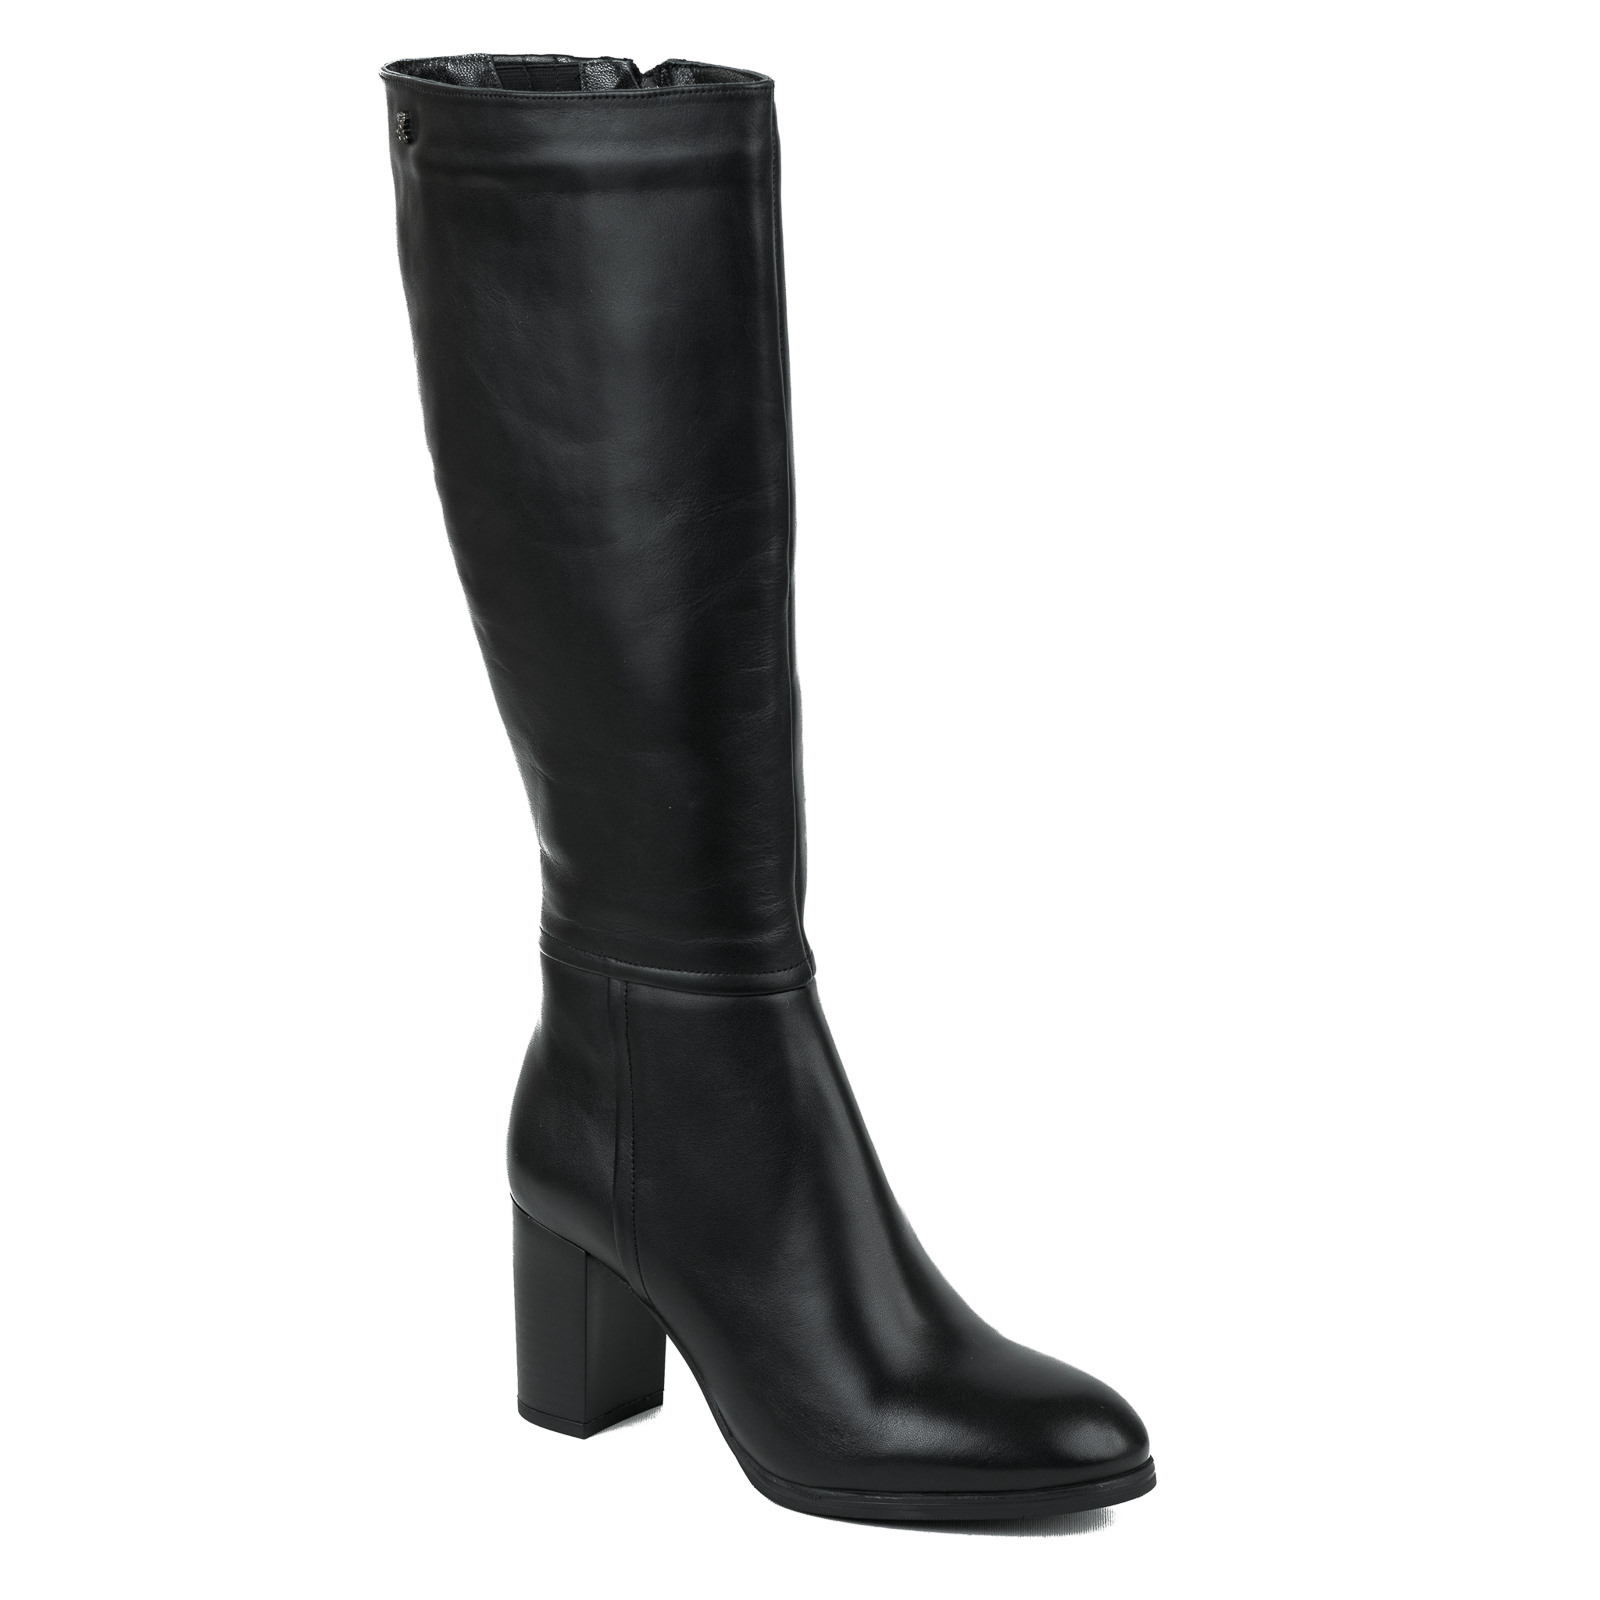 Leather boots B659 - BLACK